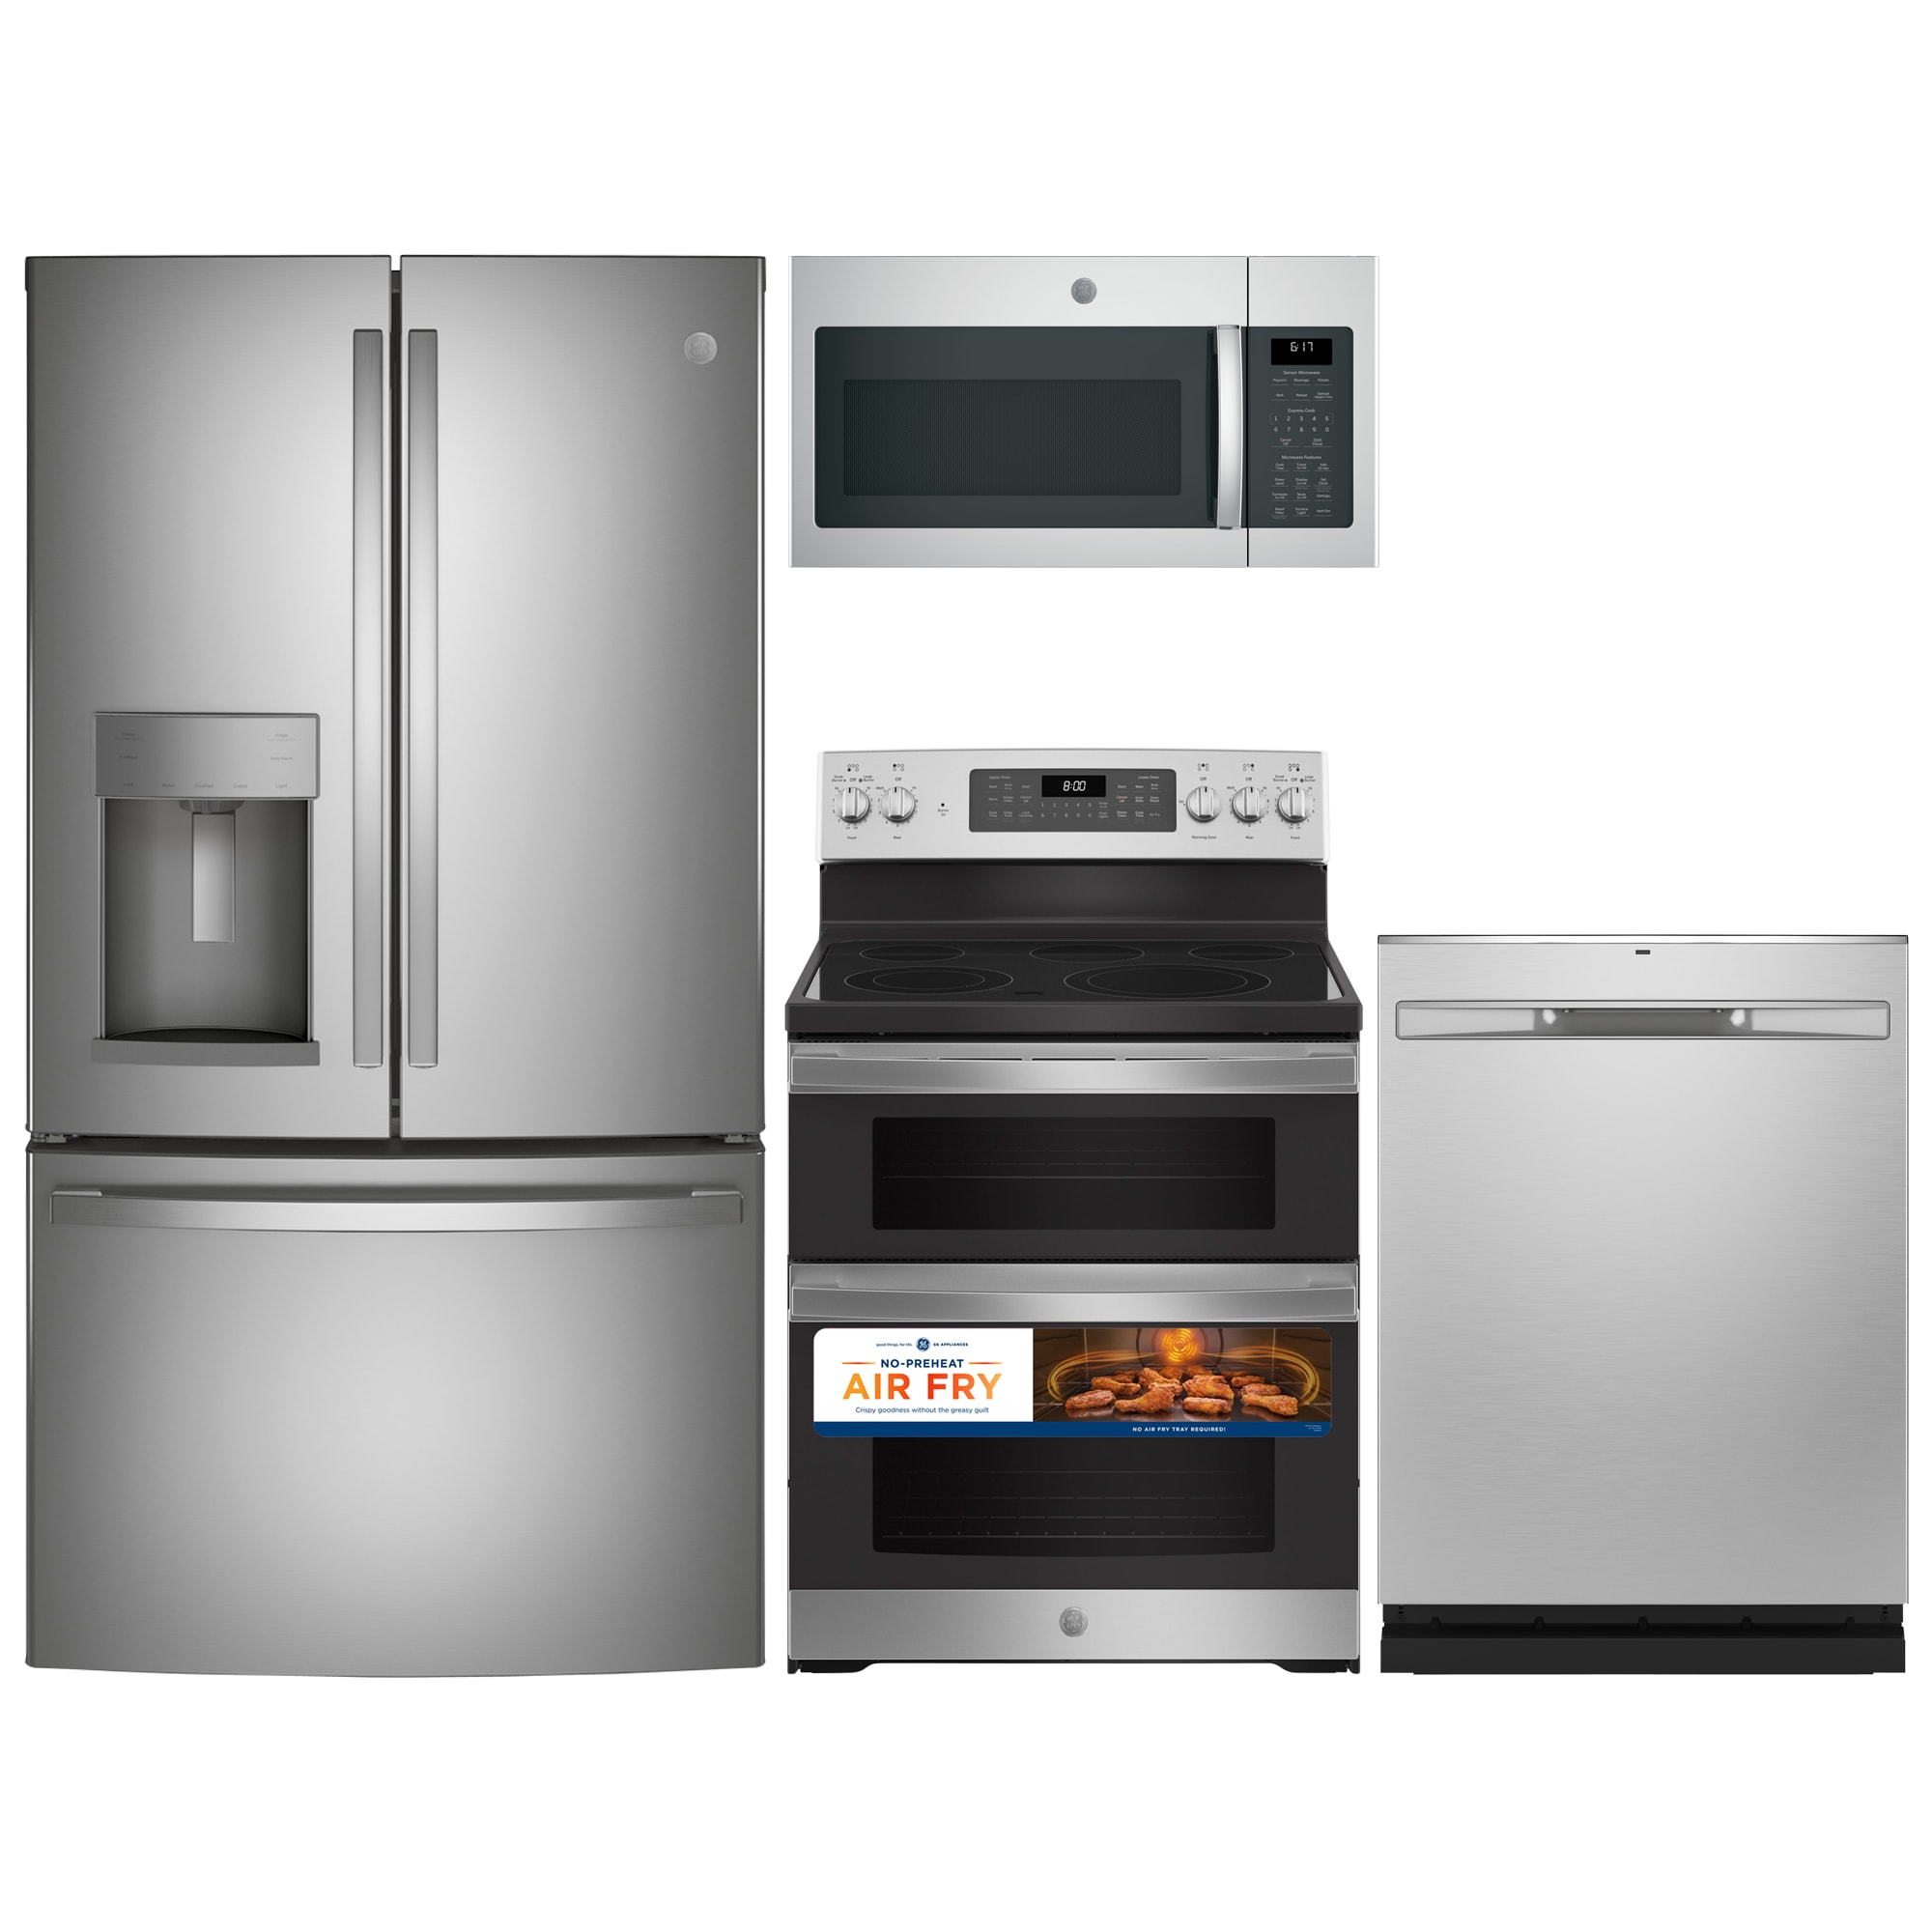 appliances - Oven thermostat substitute? - Home Improvement Stack Exchange